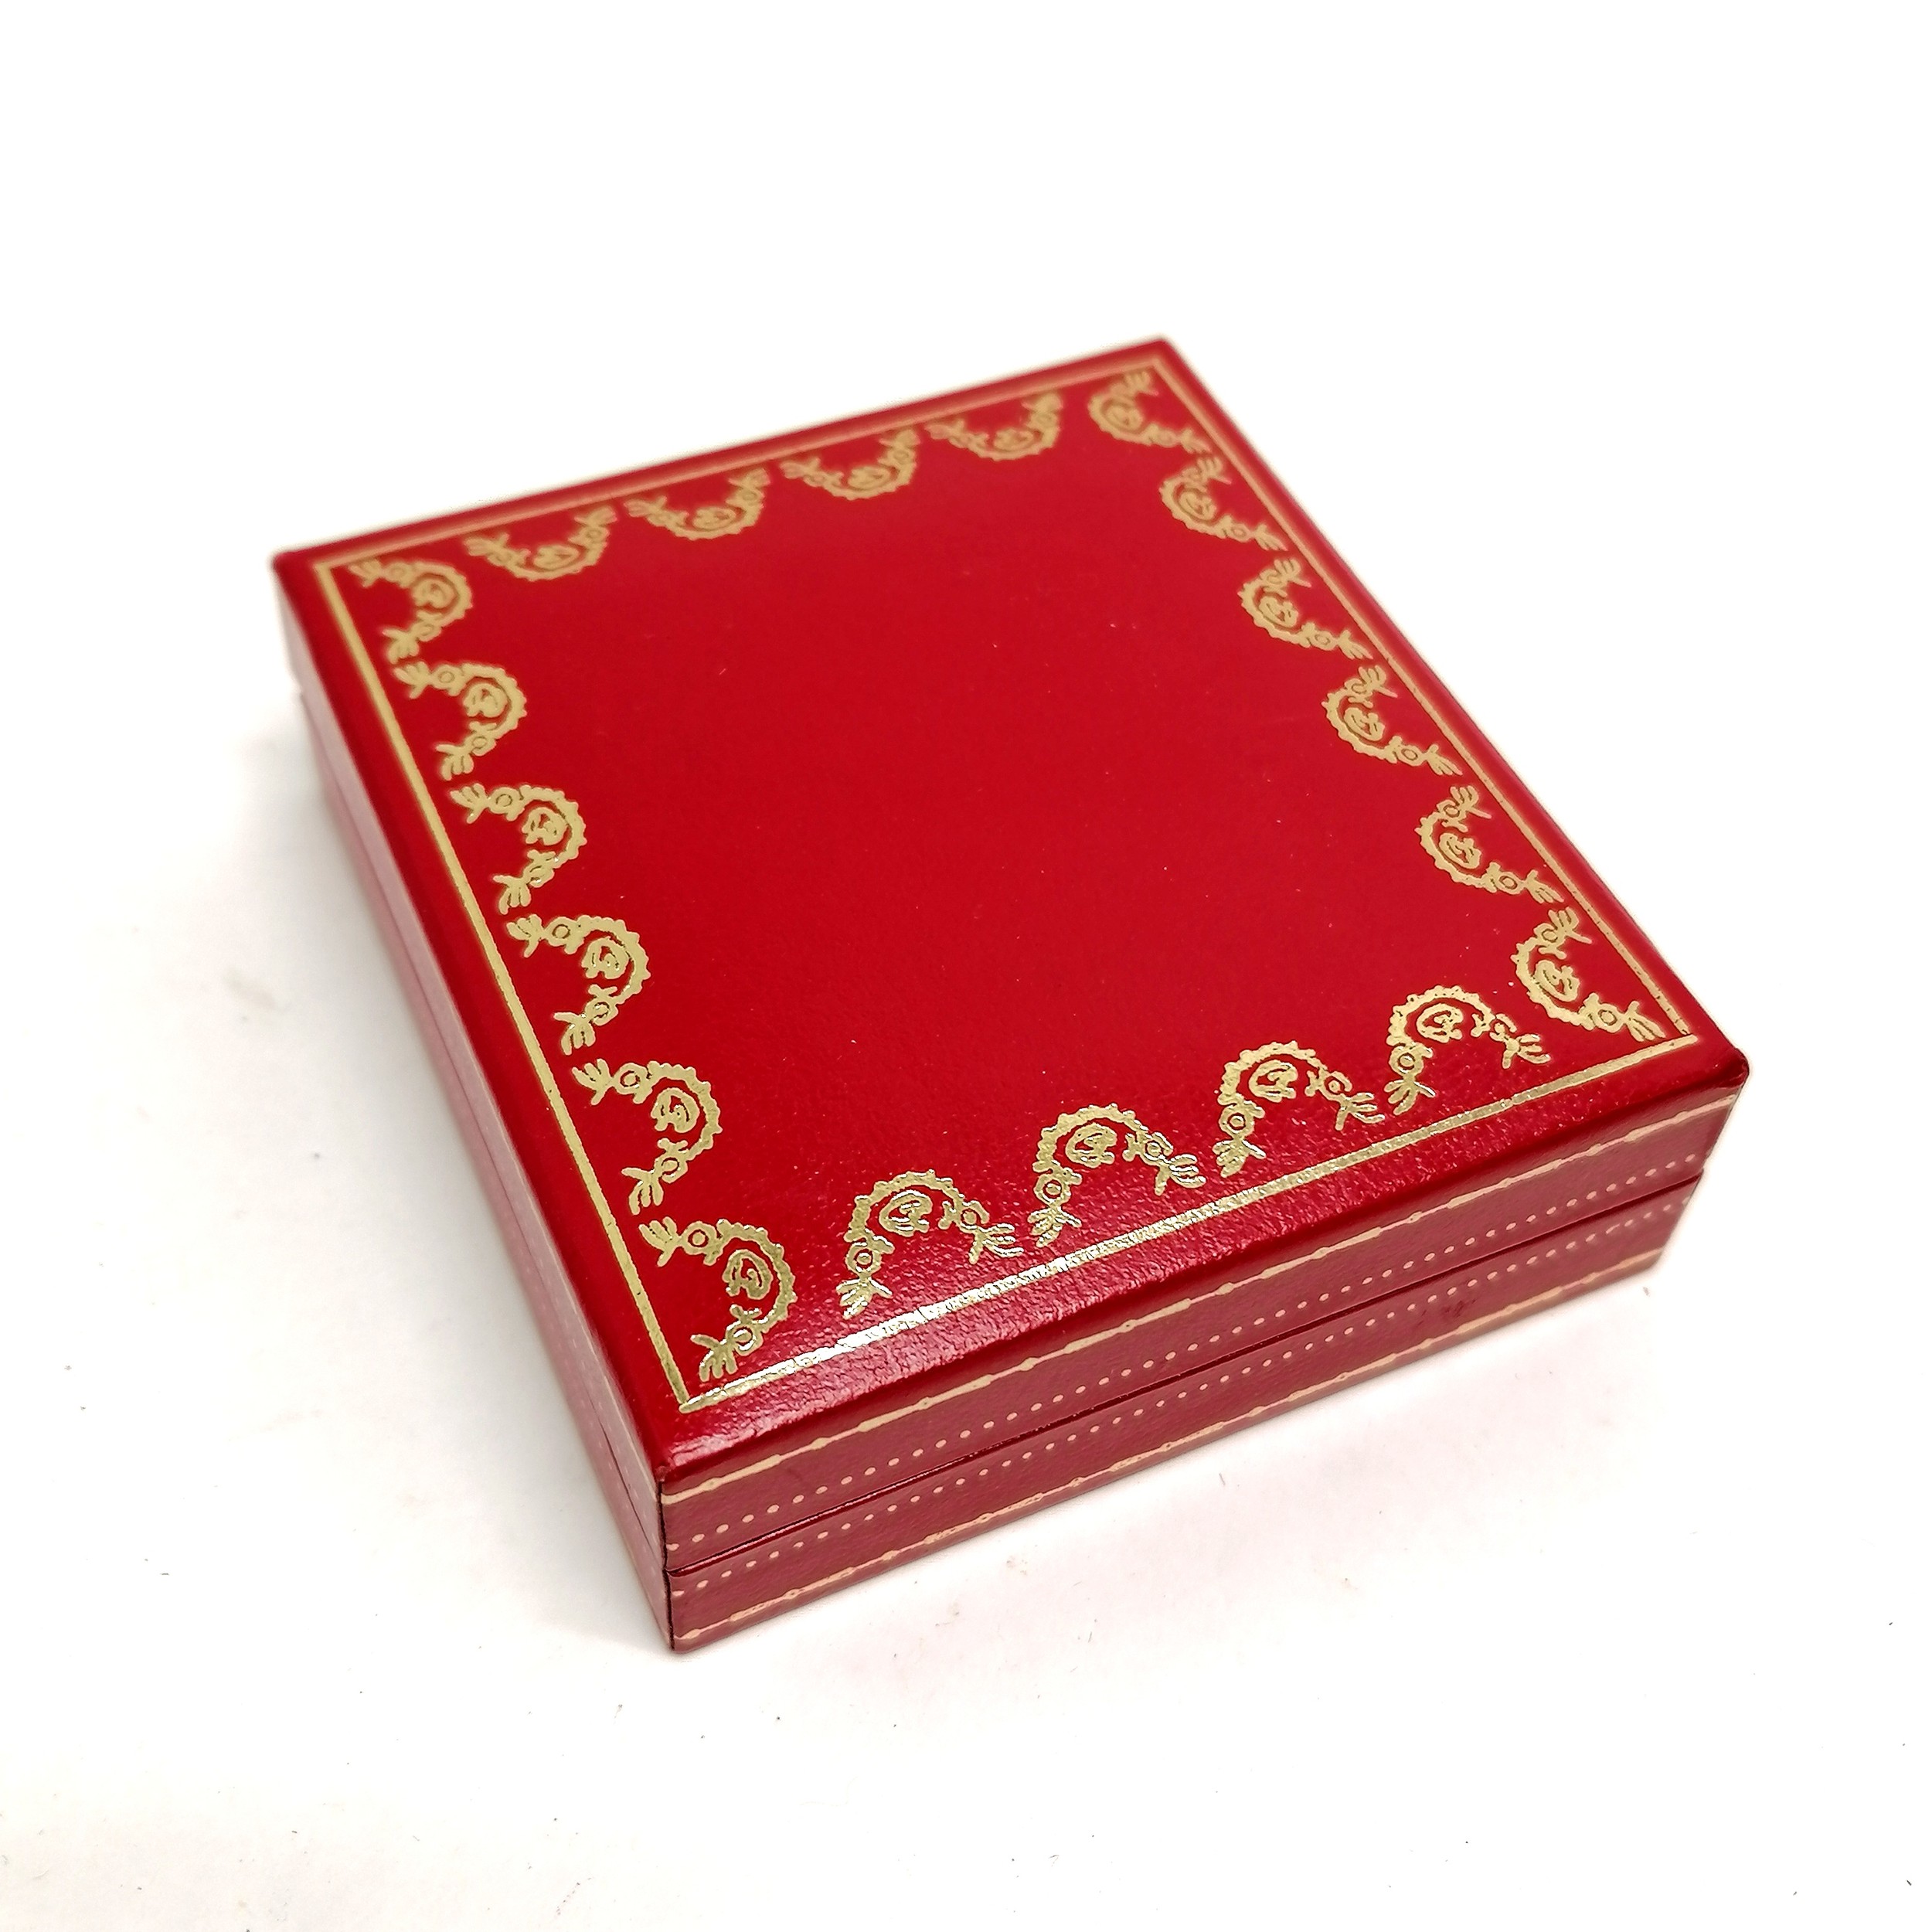 Must De Cartier red leather retail box 7cm x 7.8cm x 2cm T\w a red suede fashion pouch - Image 3 of 3